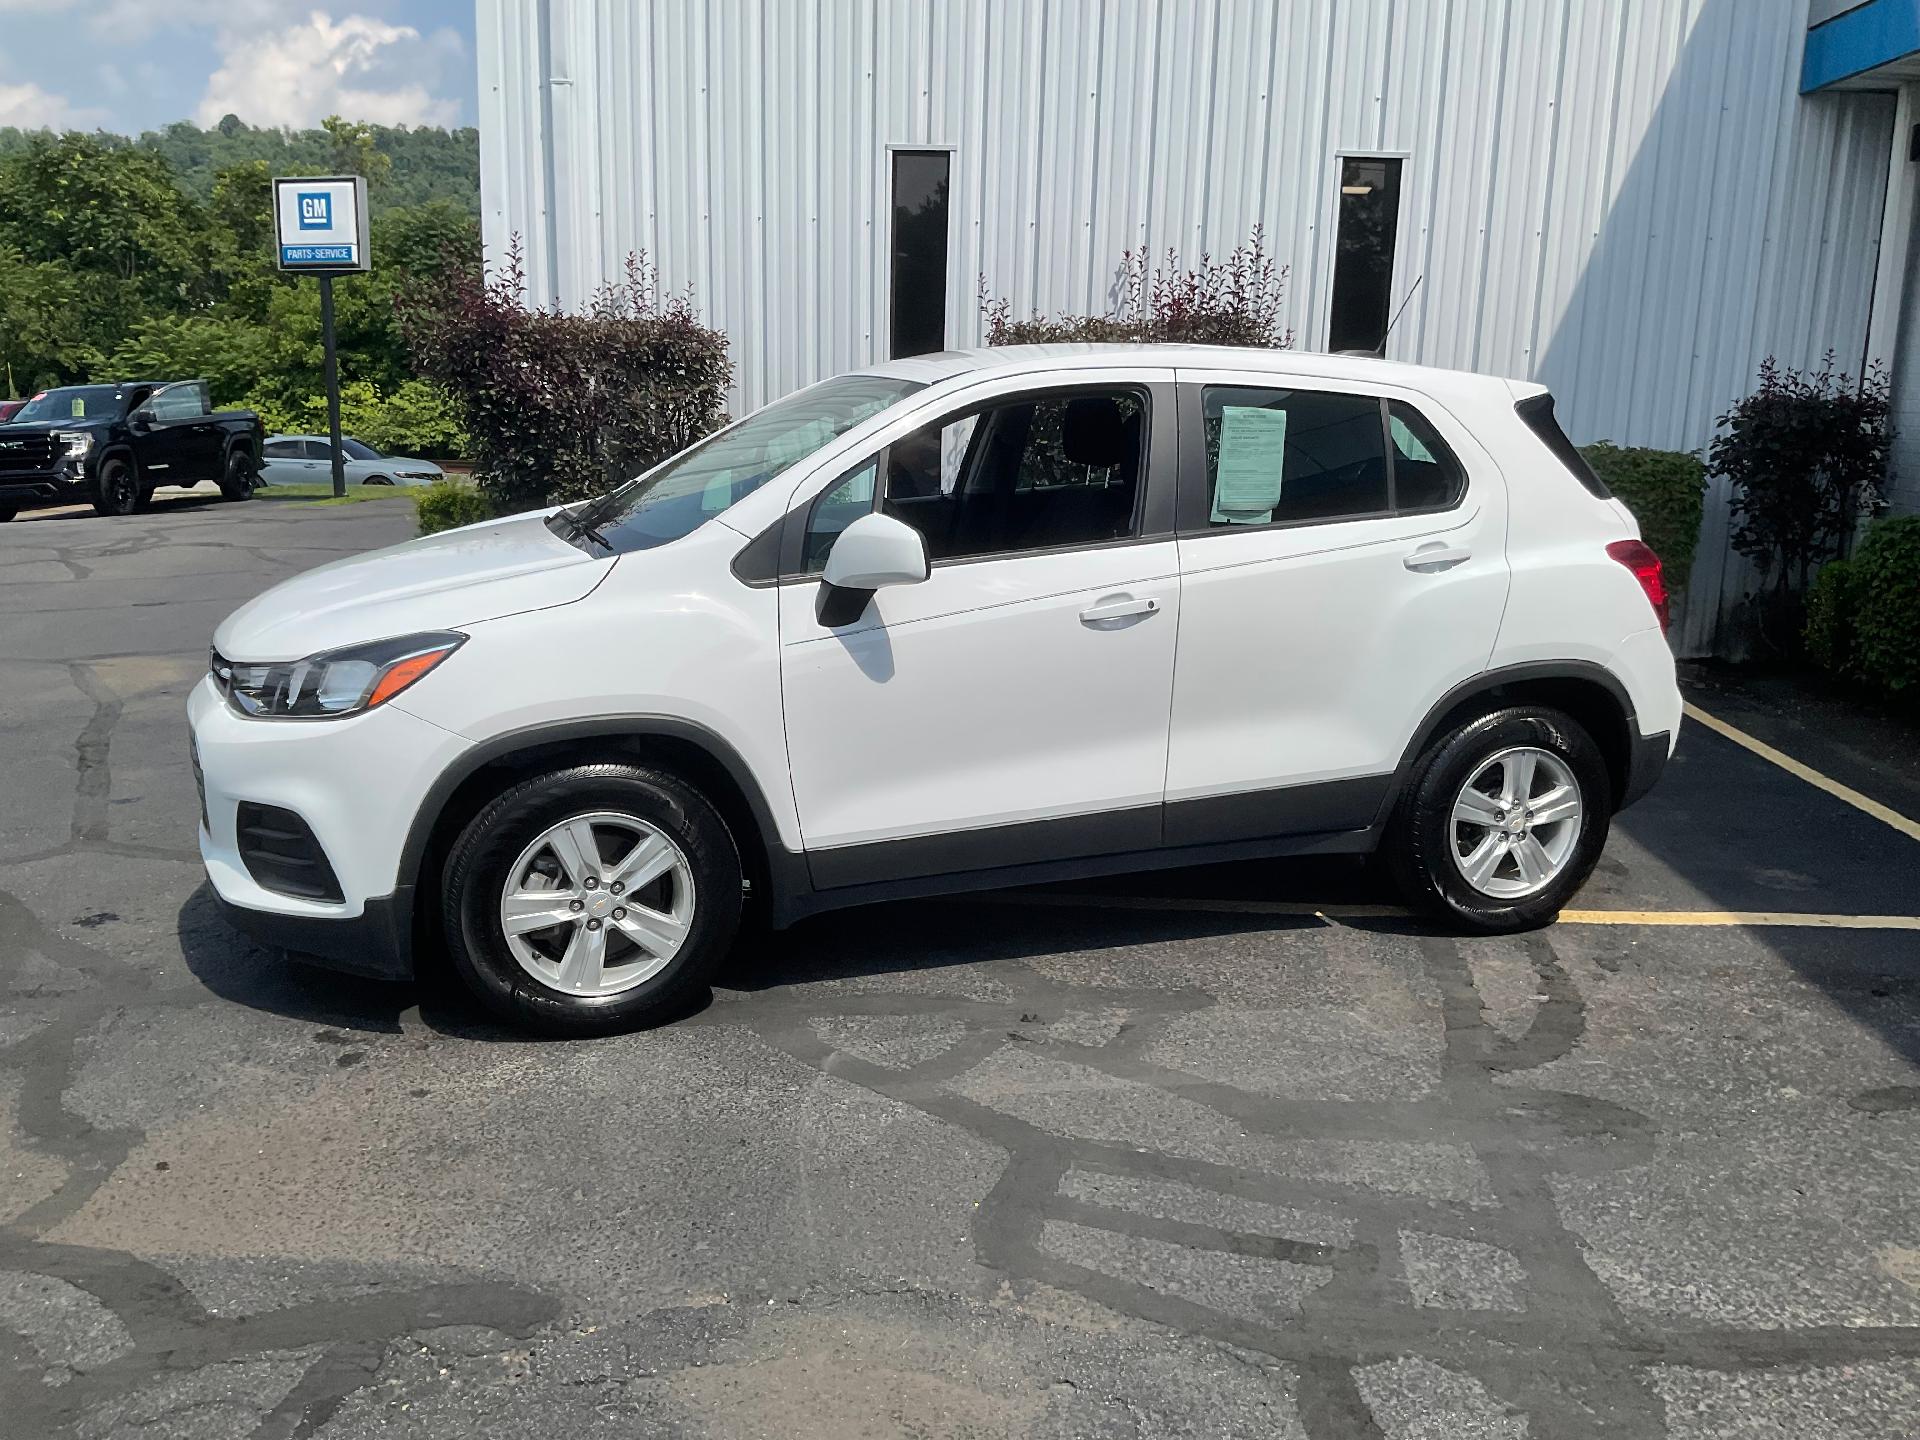 Used 2020 Chevrolet Trax LS with VIN 3GNCJKSB0LL141816 for sale in Moundsville, WV